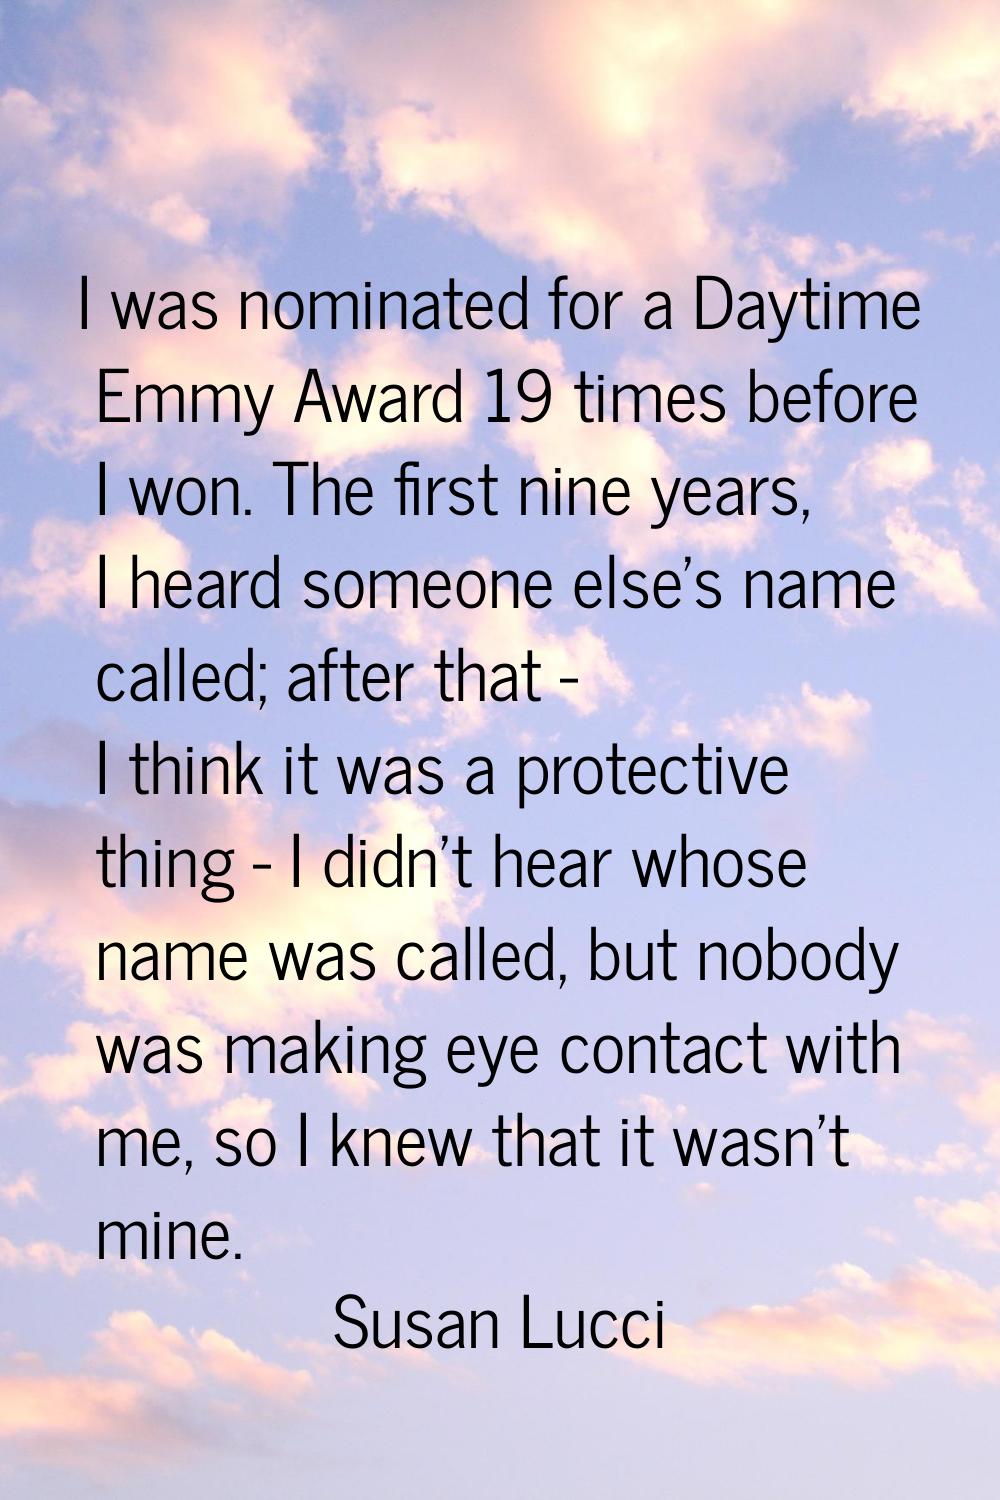 I was nominated for a Daytime Emmy Award 19 times before I won. The first nine years, I heard someo